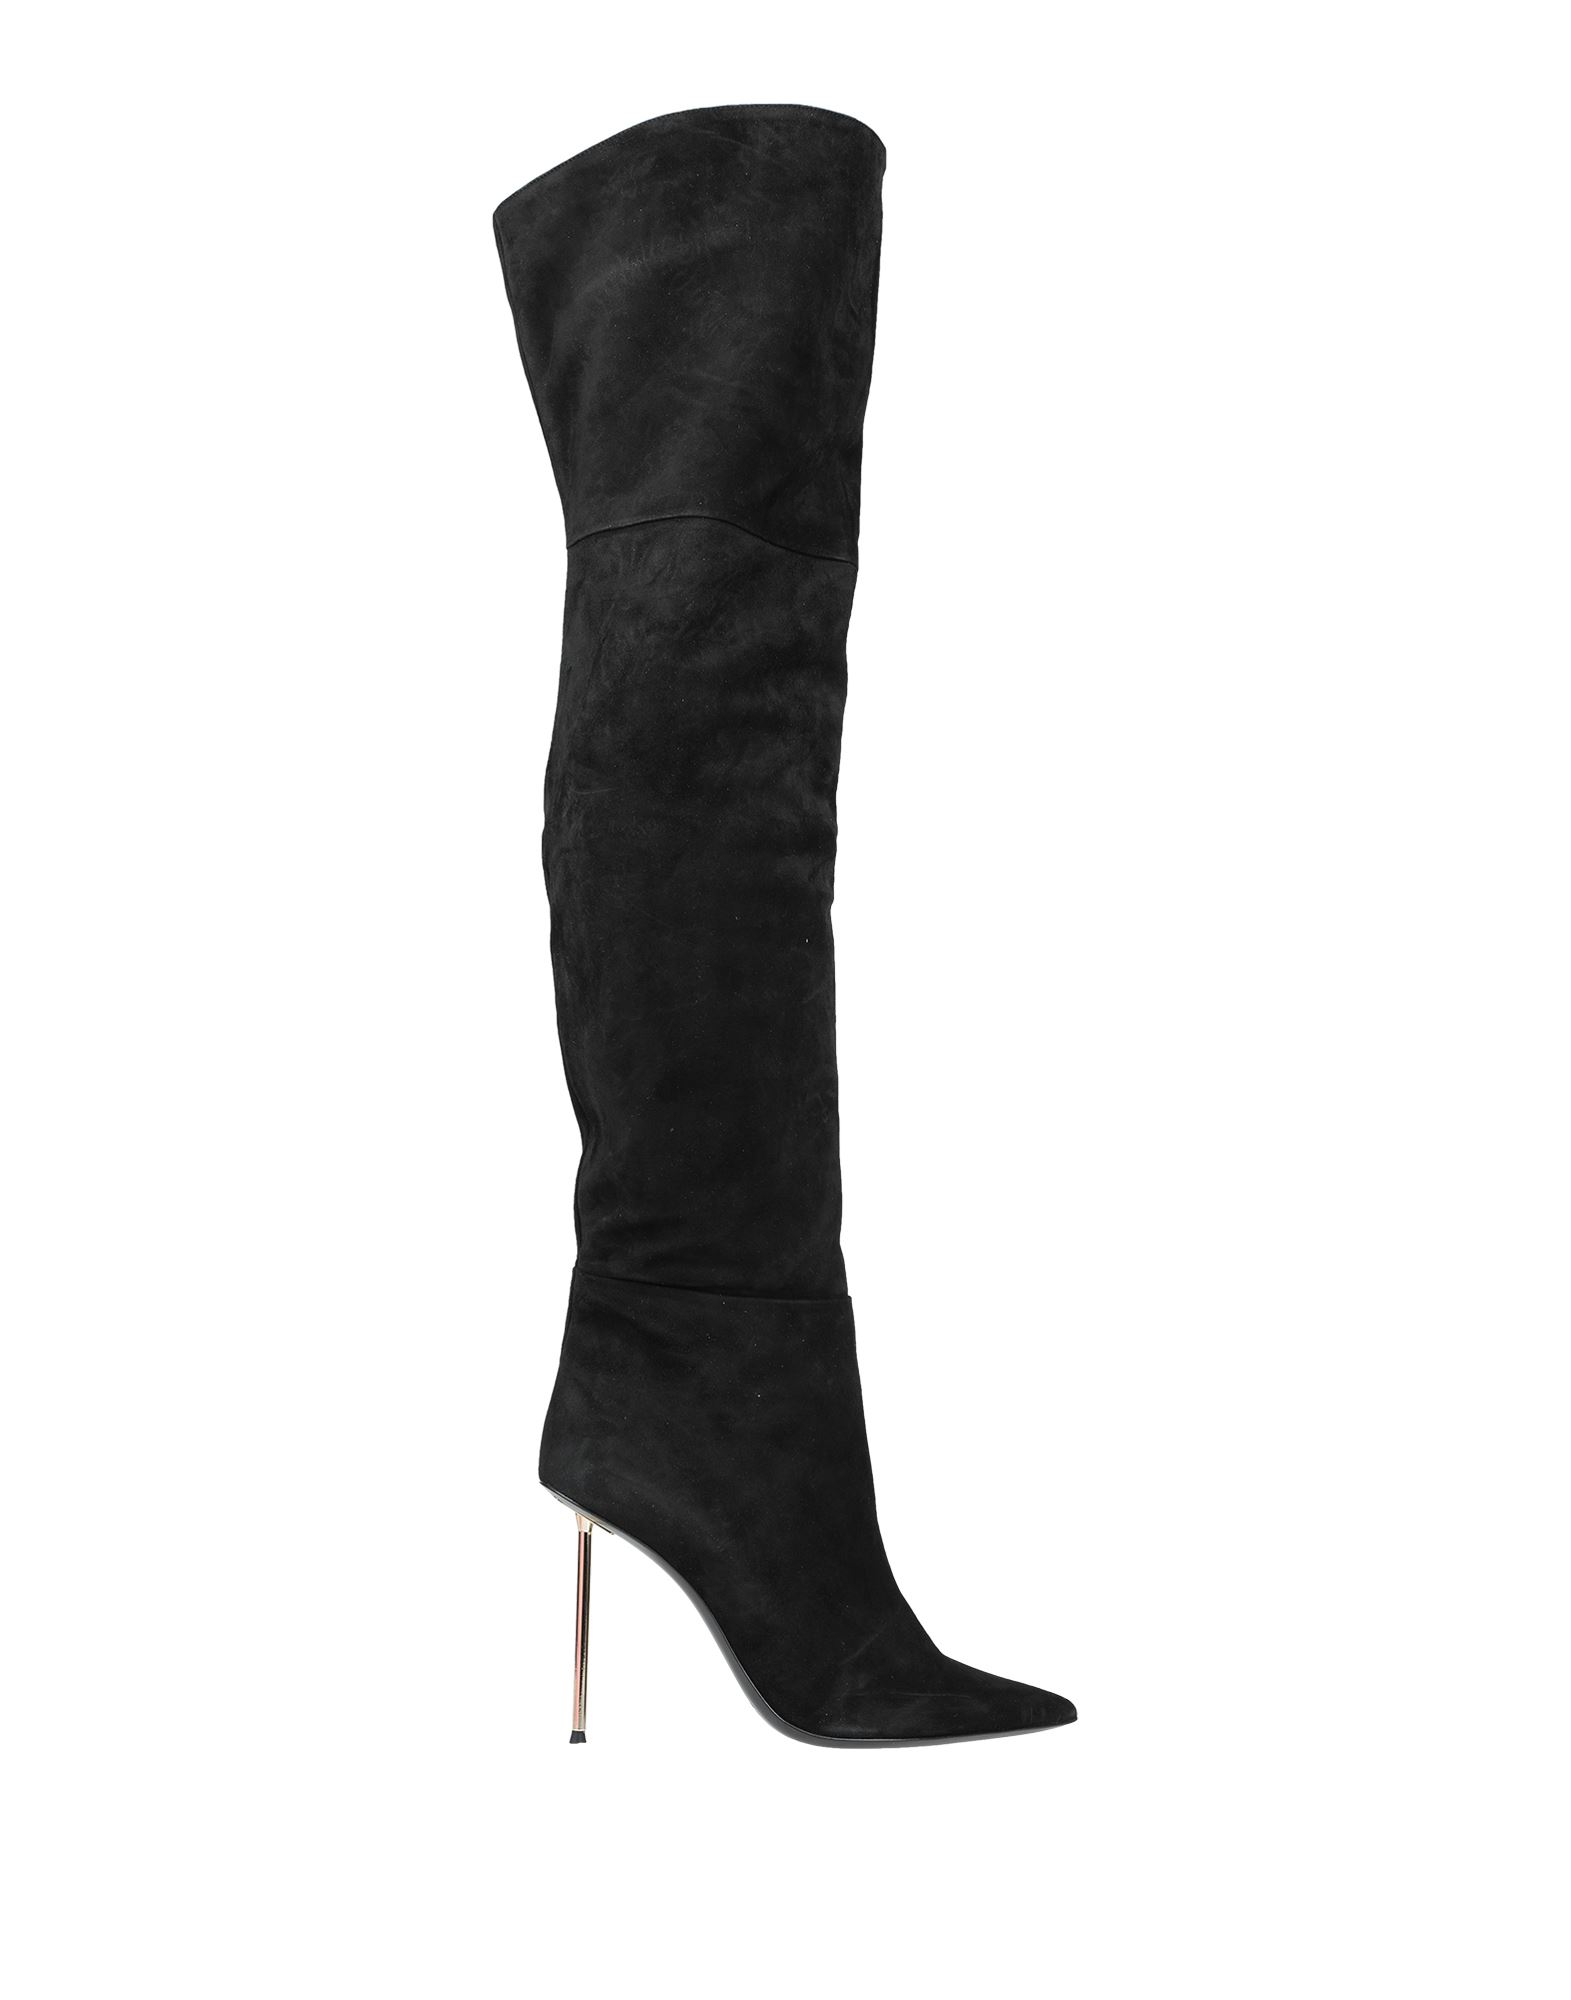 Aldo Castagna For Shabby Chic Knee Boots In Black